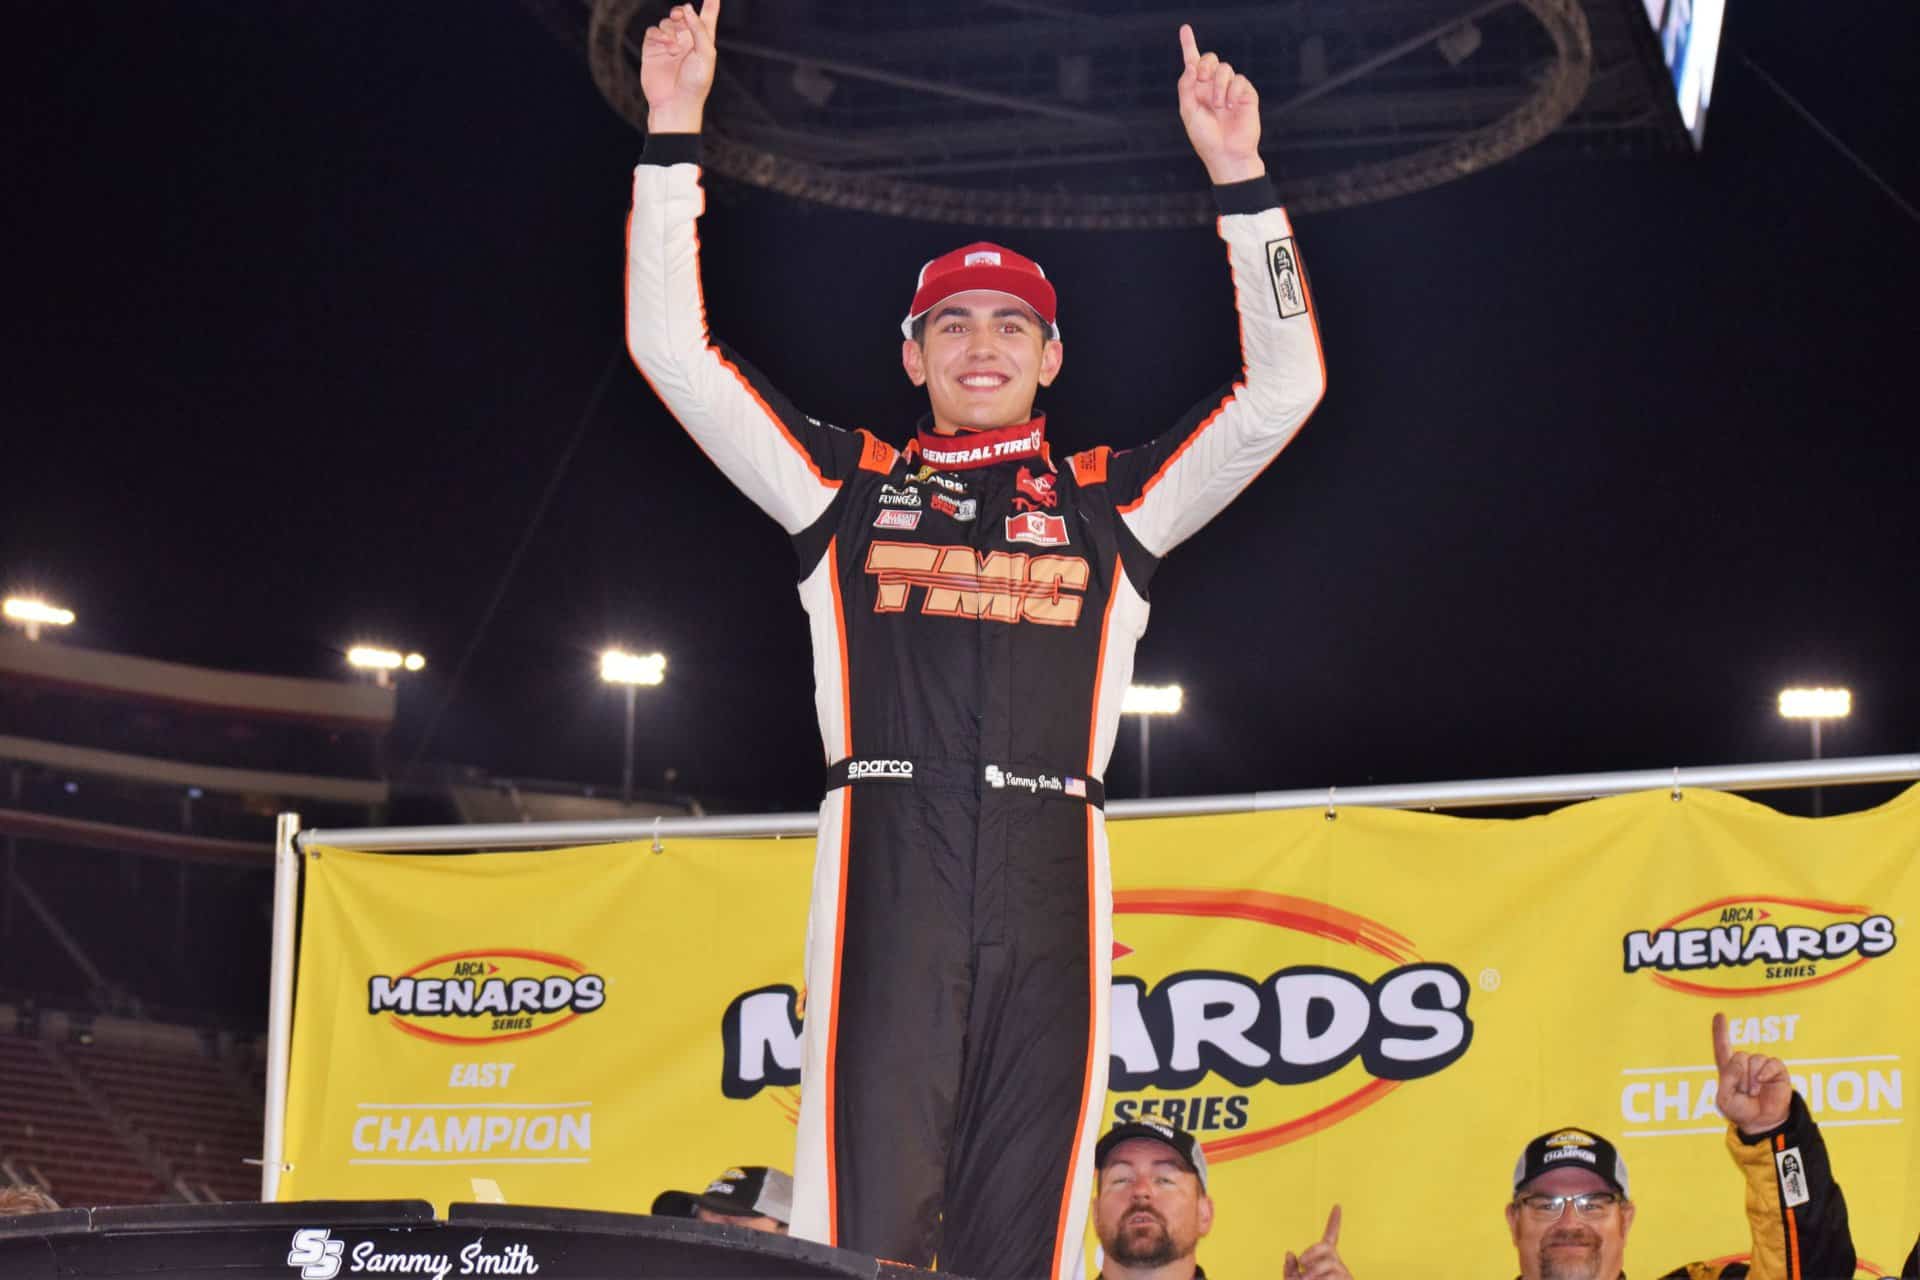 Sammy Smith celebrated as the ARCA Menards Series East champion for the second year in a row on Thursday night.